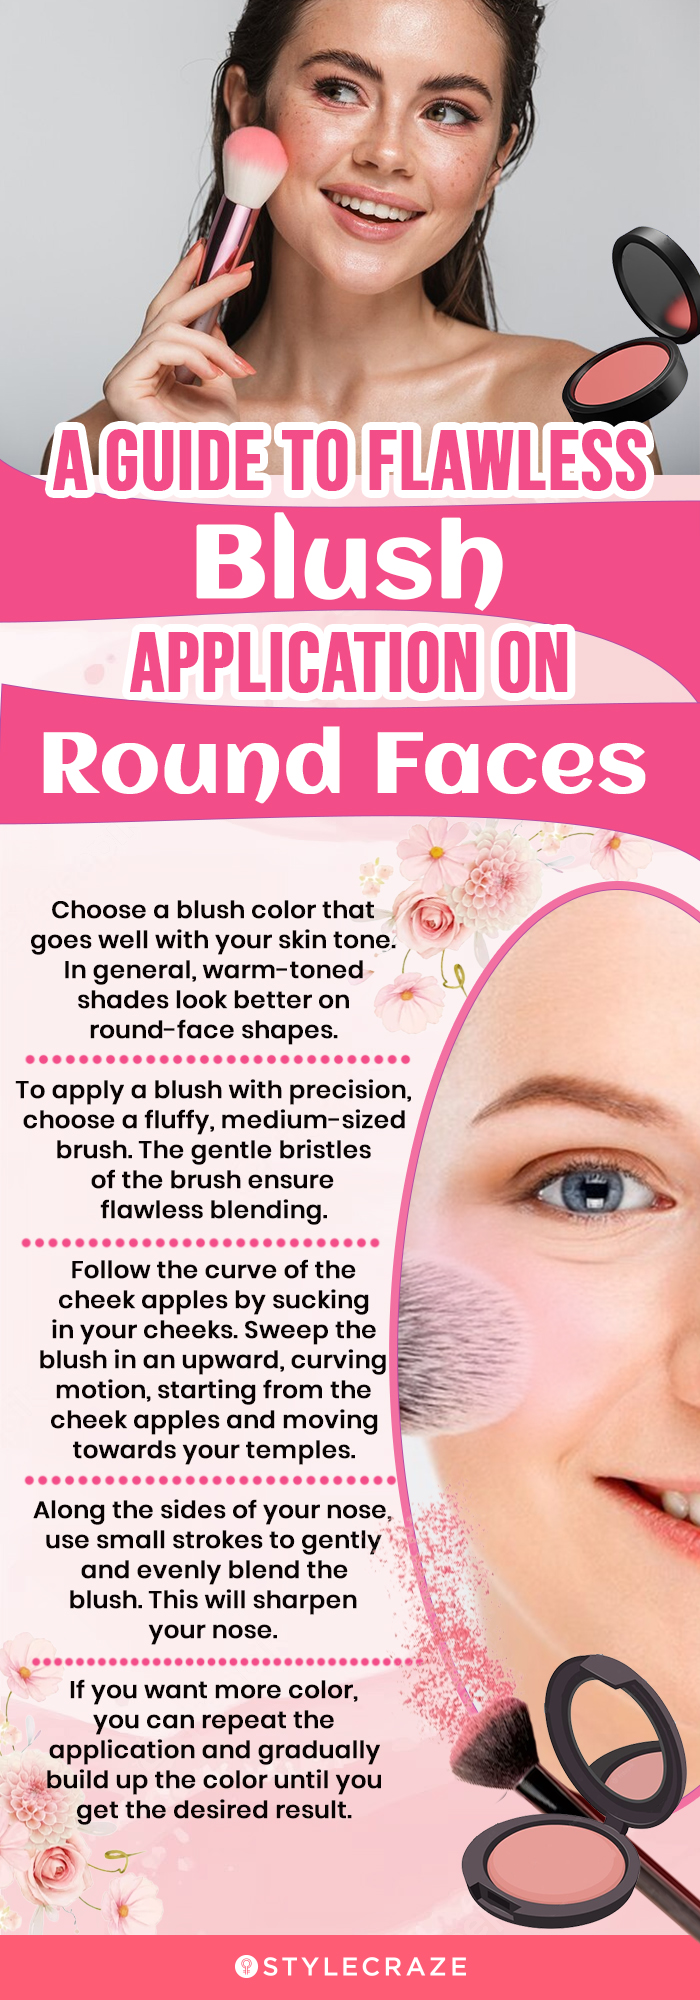 A Guide To Flawless Blush Application On Round Faces(infographic)